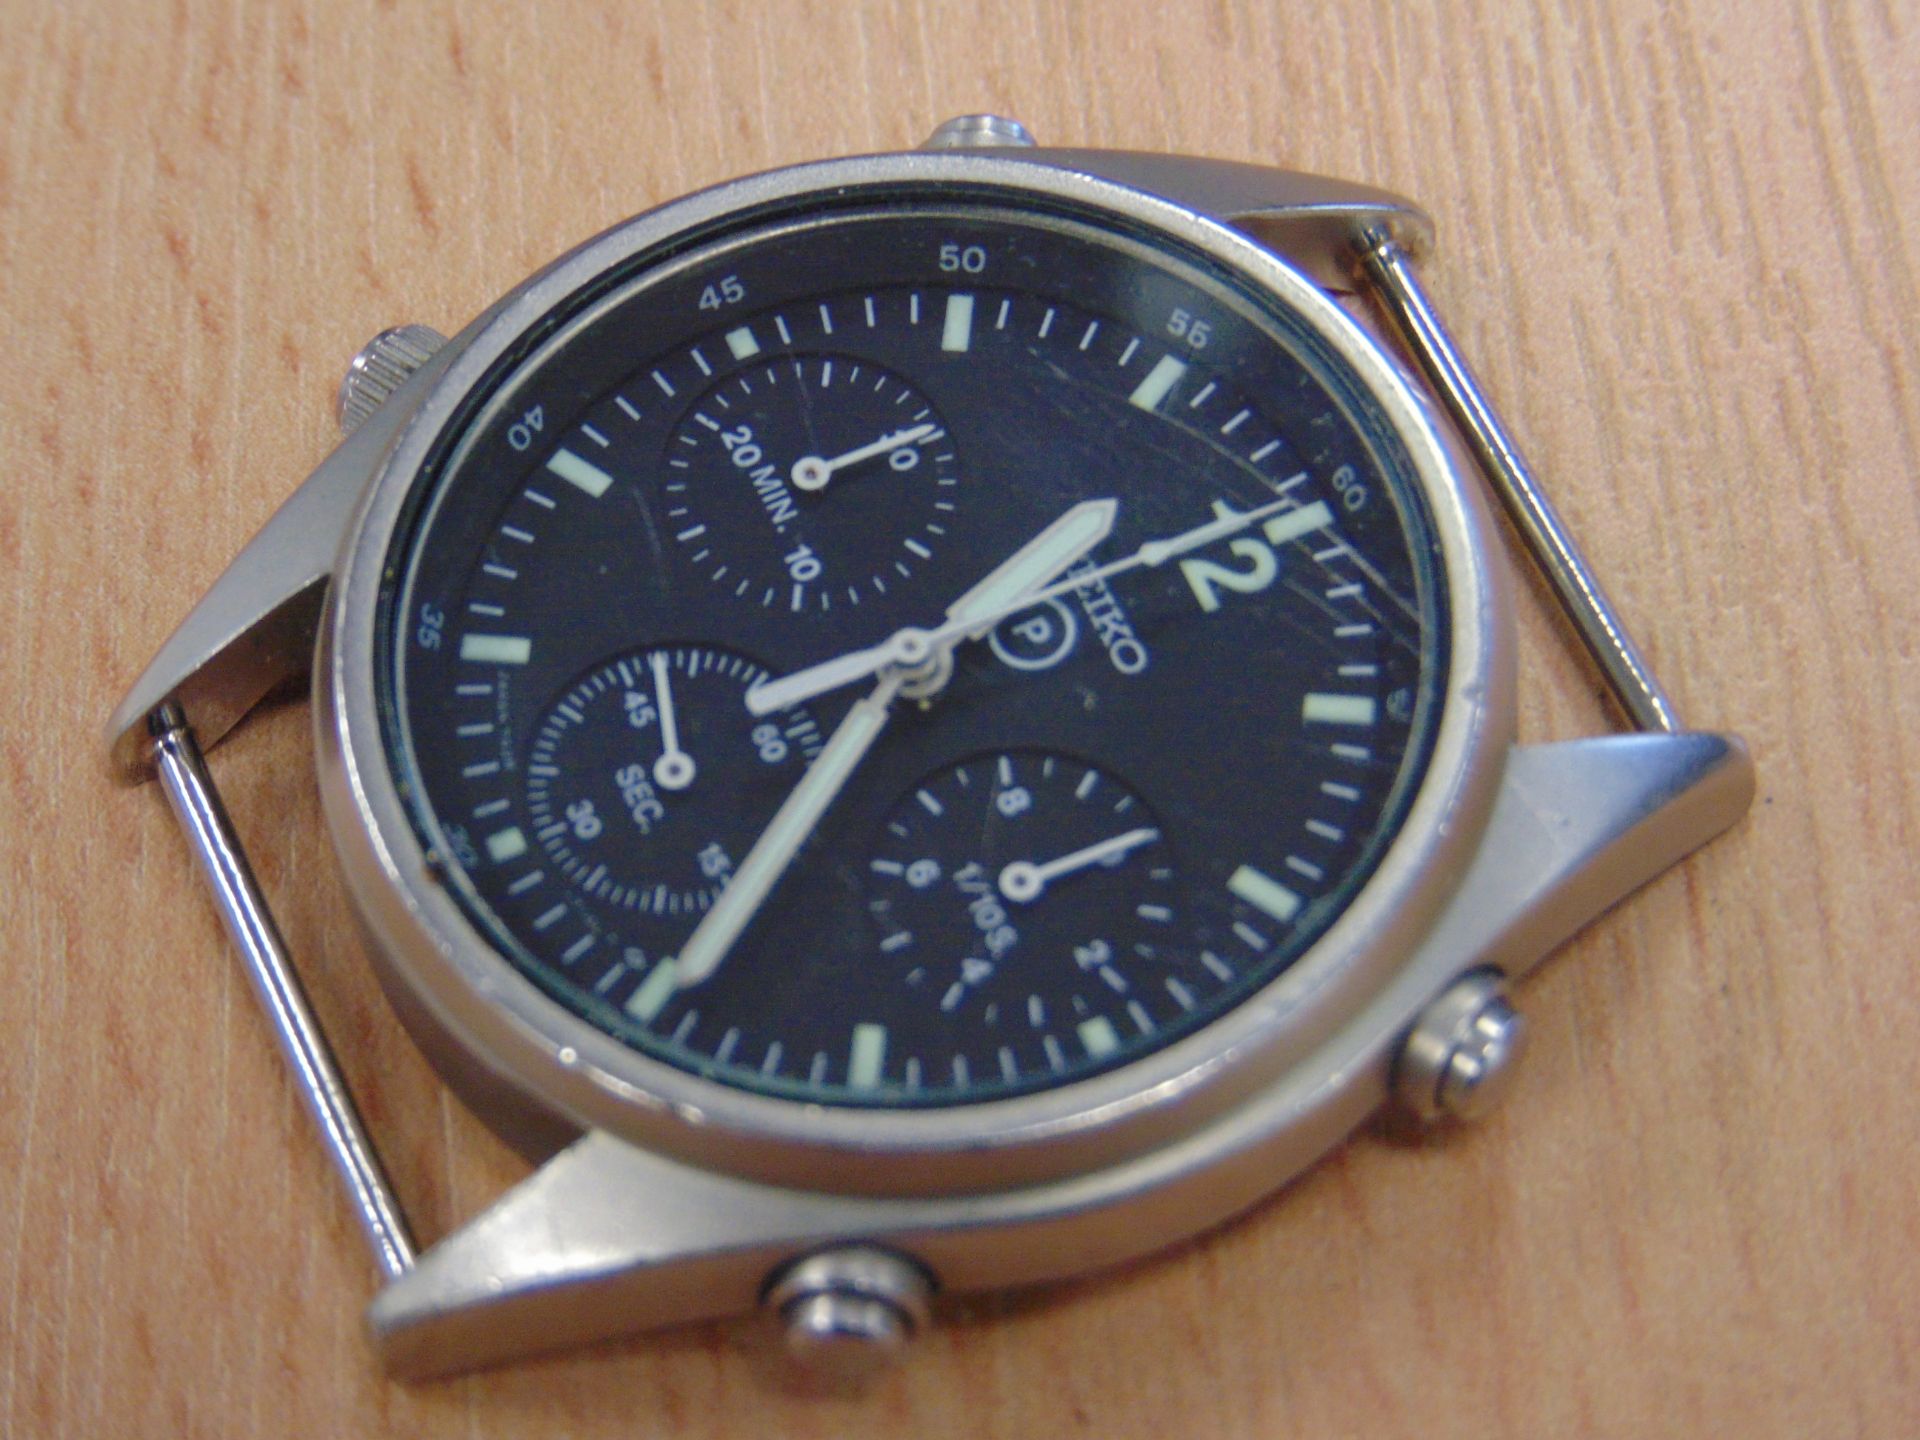 Very Nice SEIKO GEN I PILOTS CHRONO R.A.F. ISSUE NATO MARKED DATED 1990 ( GULF WAR) - Image 2 of 8